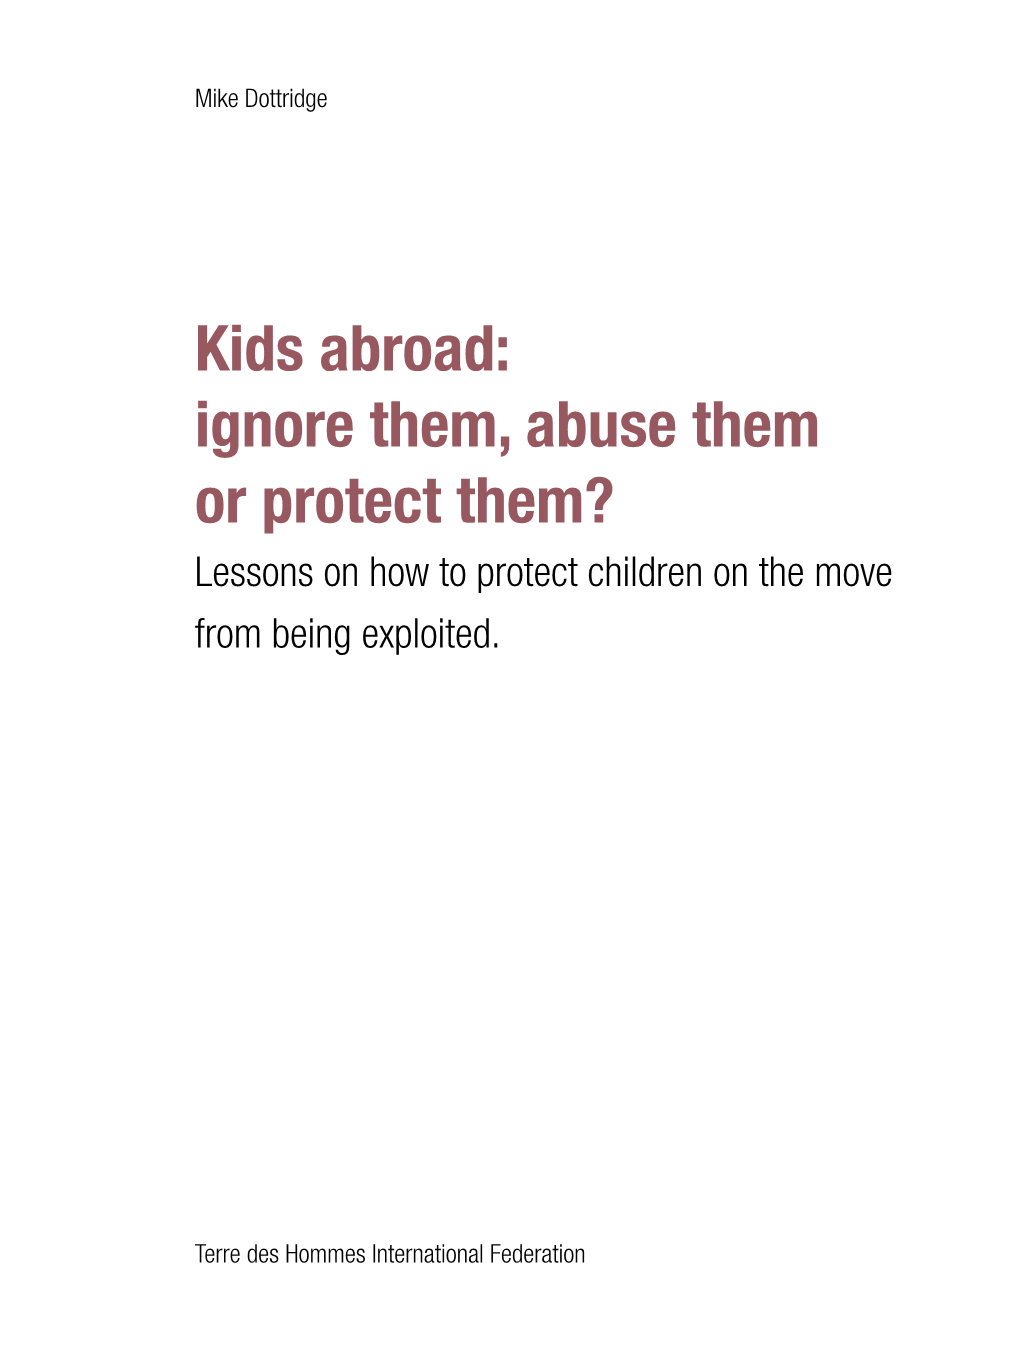 Kids Abroad: Ignore Them, Abuse Them Or Protect Them? Lessons on How to Protect Children on the Move from Being Exploited